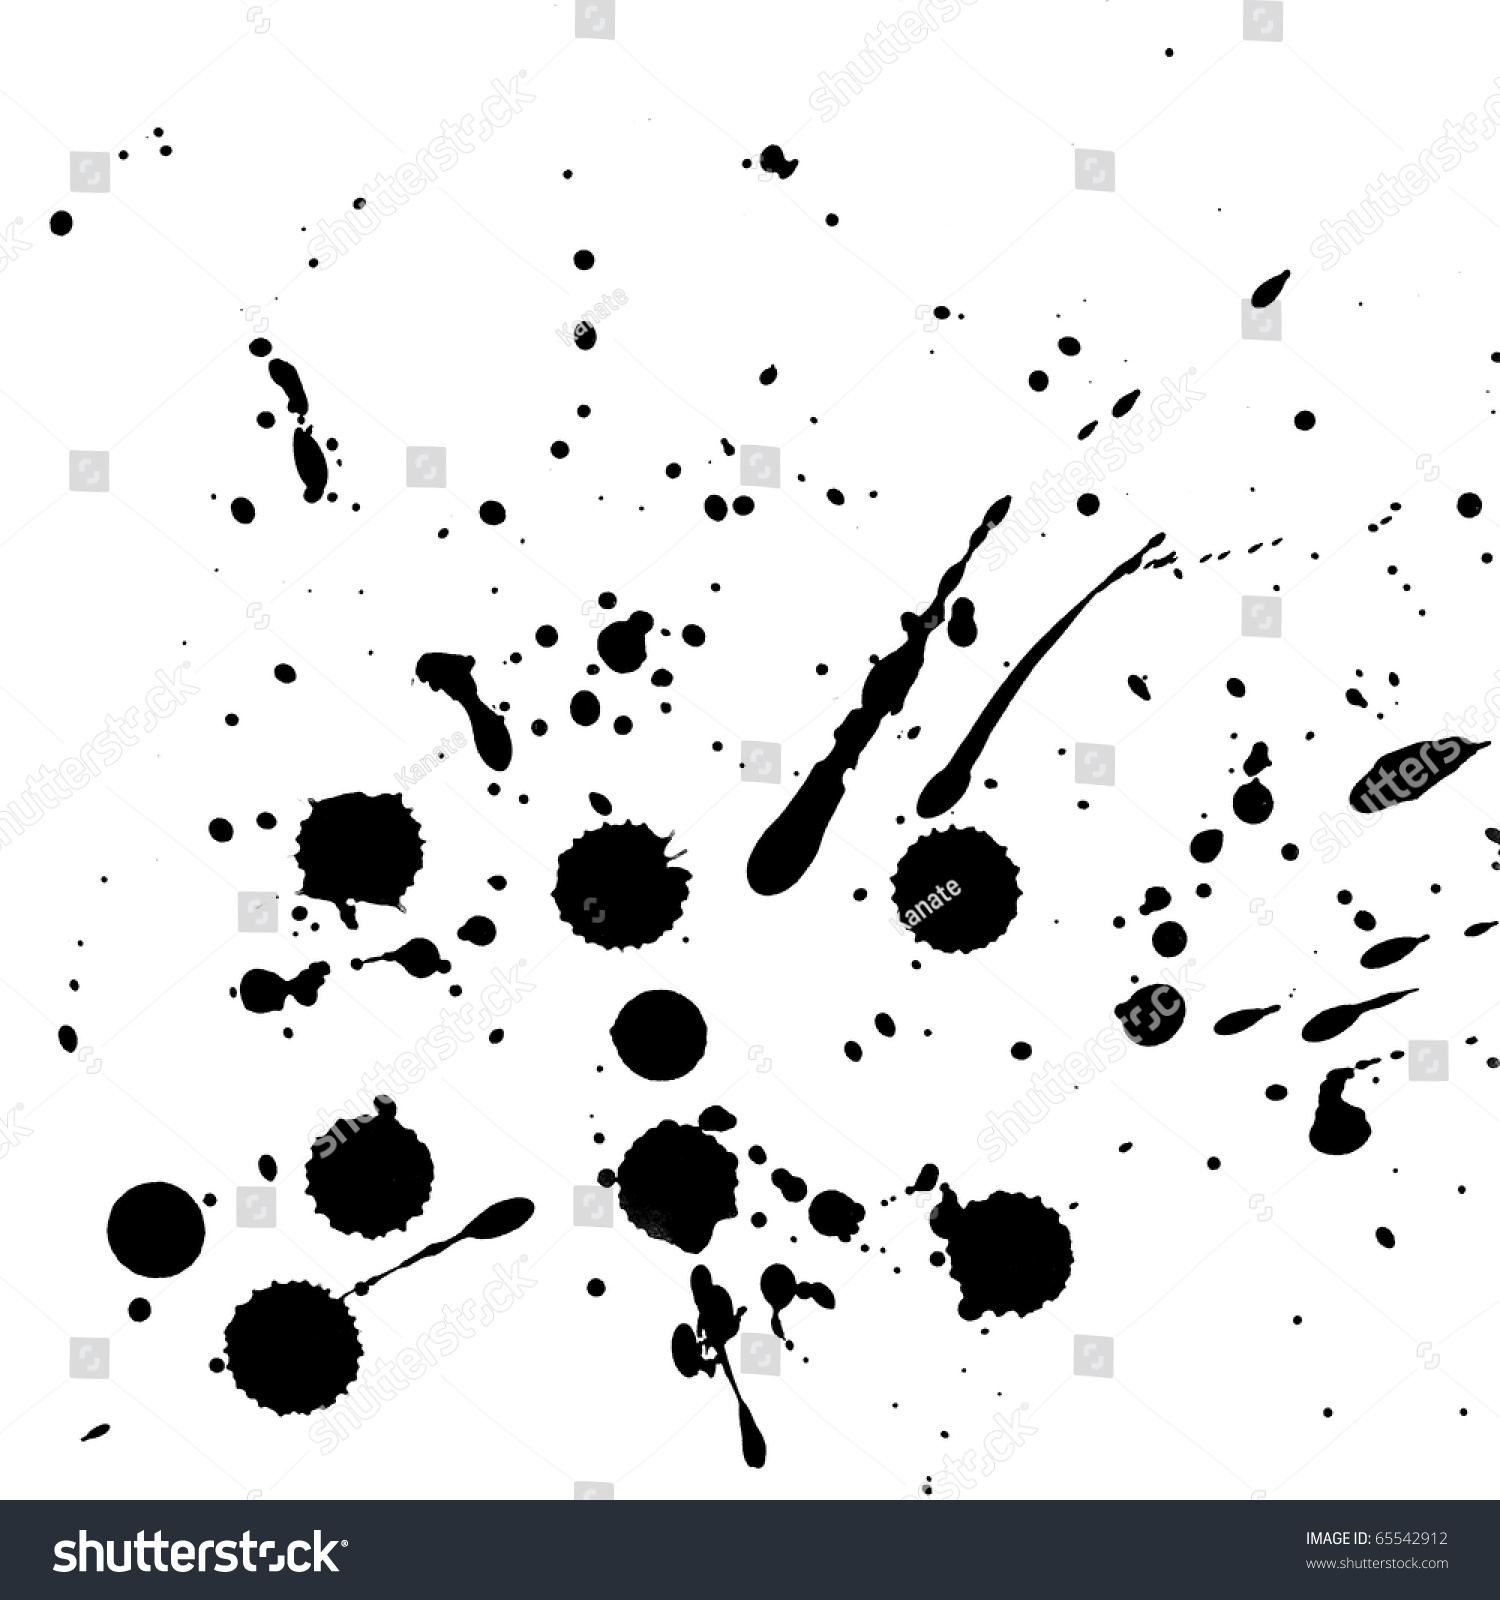 Splattered Black Ink Stains On A White Background Stock Photo 65542912 ...